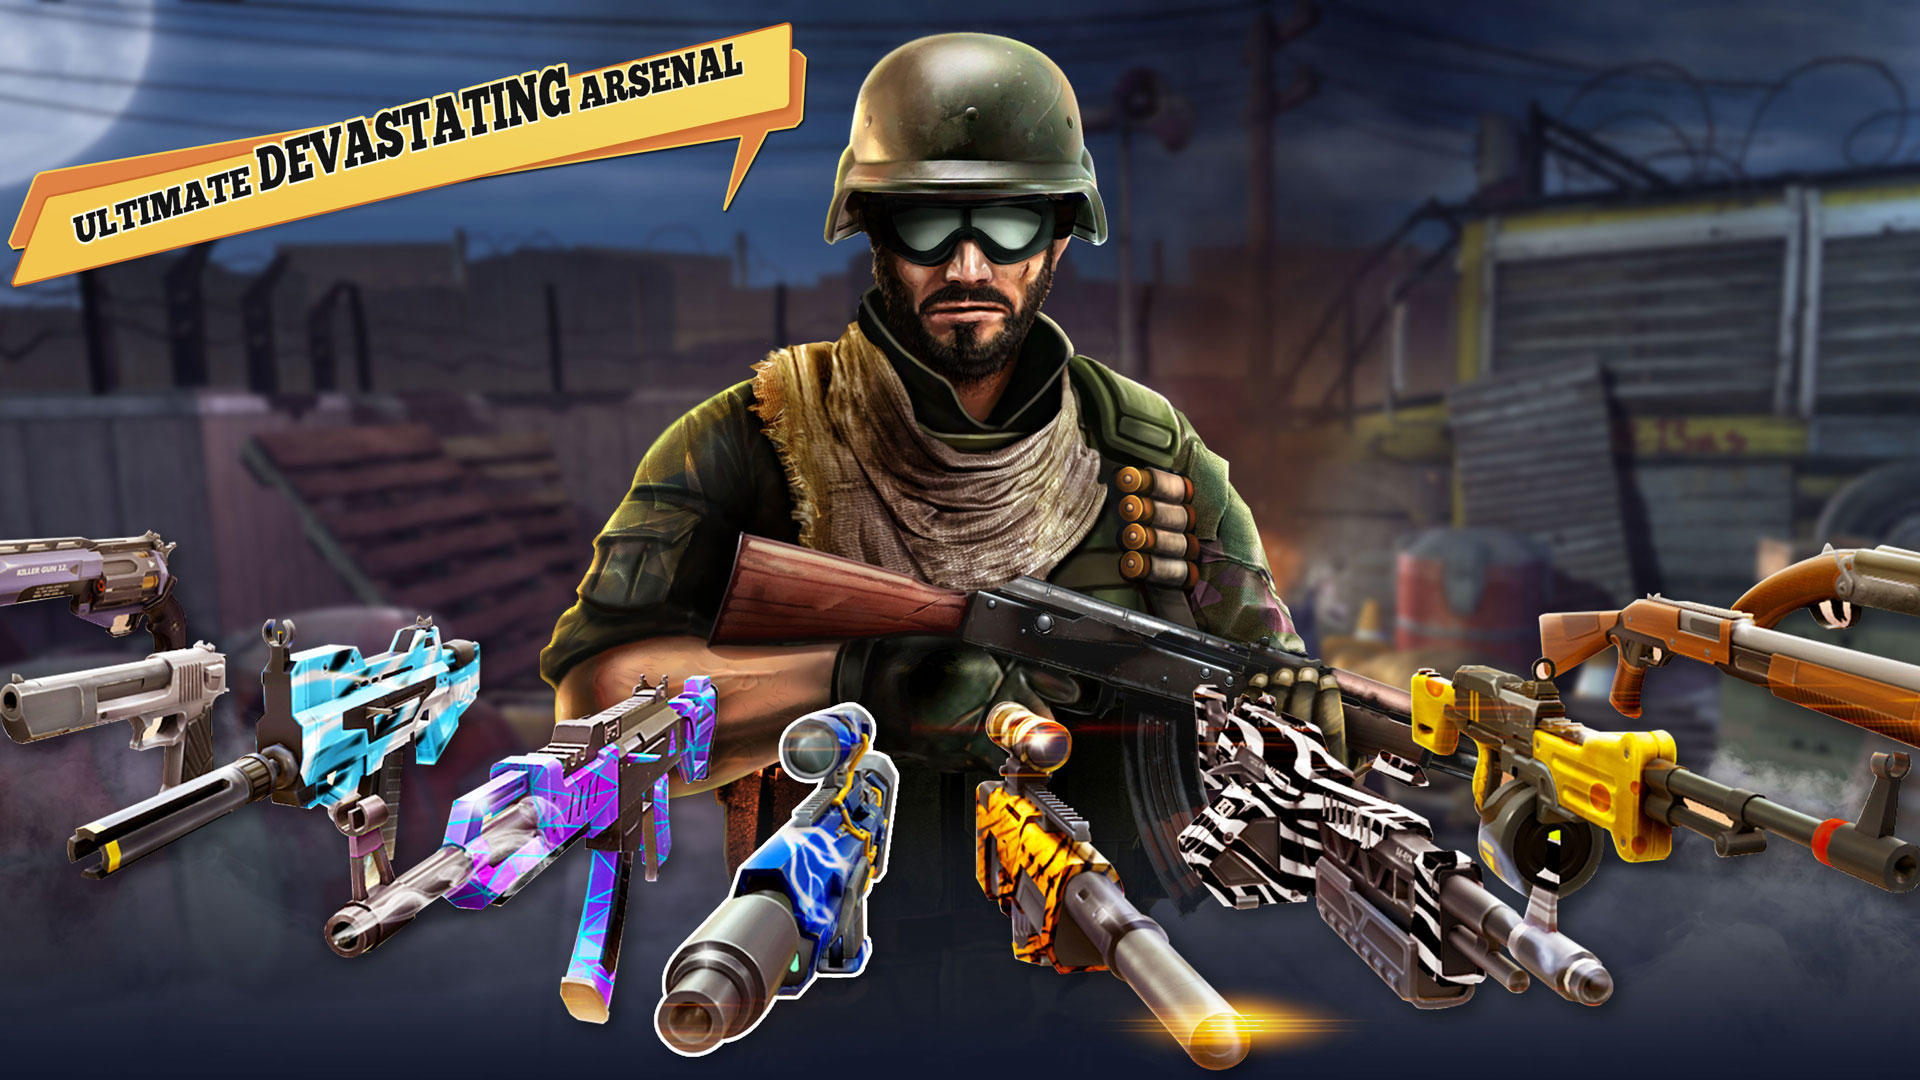 Play Fire FPS - Free Online Gun Shooting Games APK for Android Download